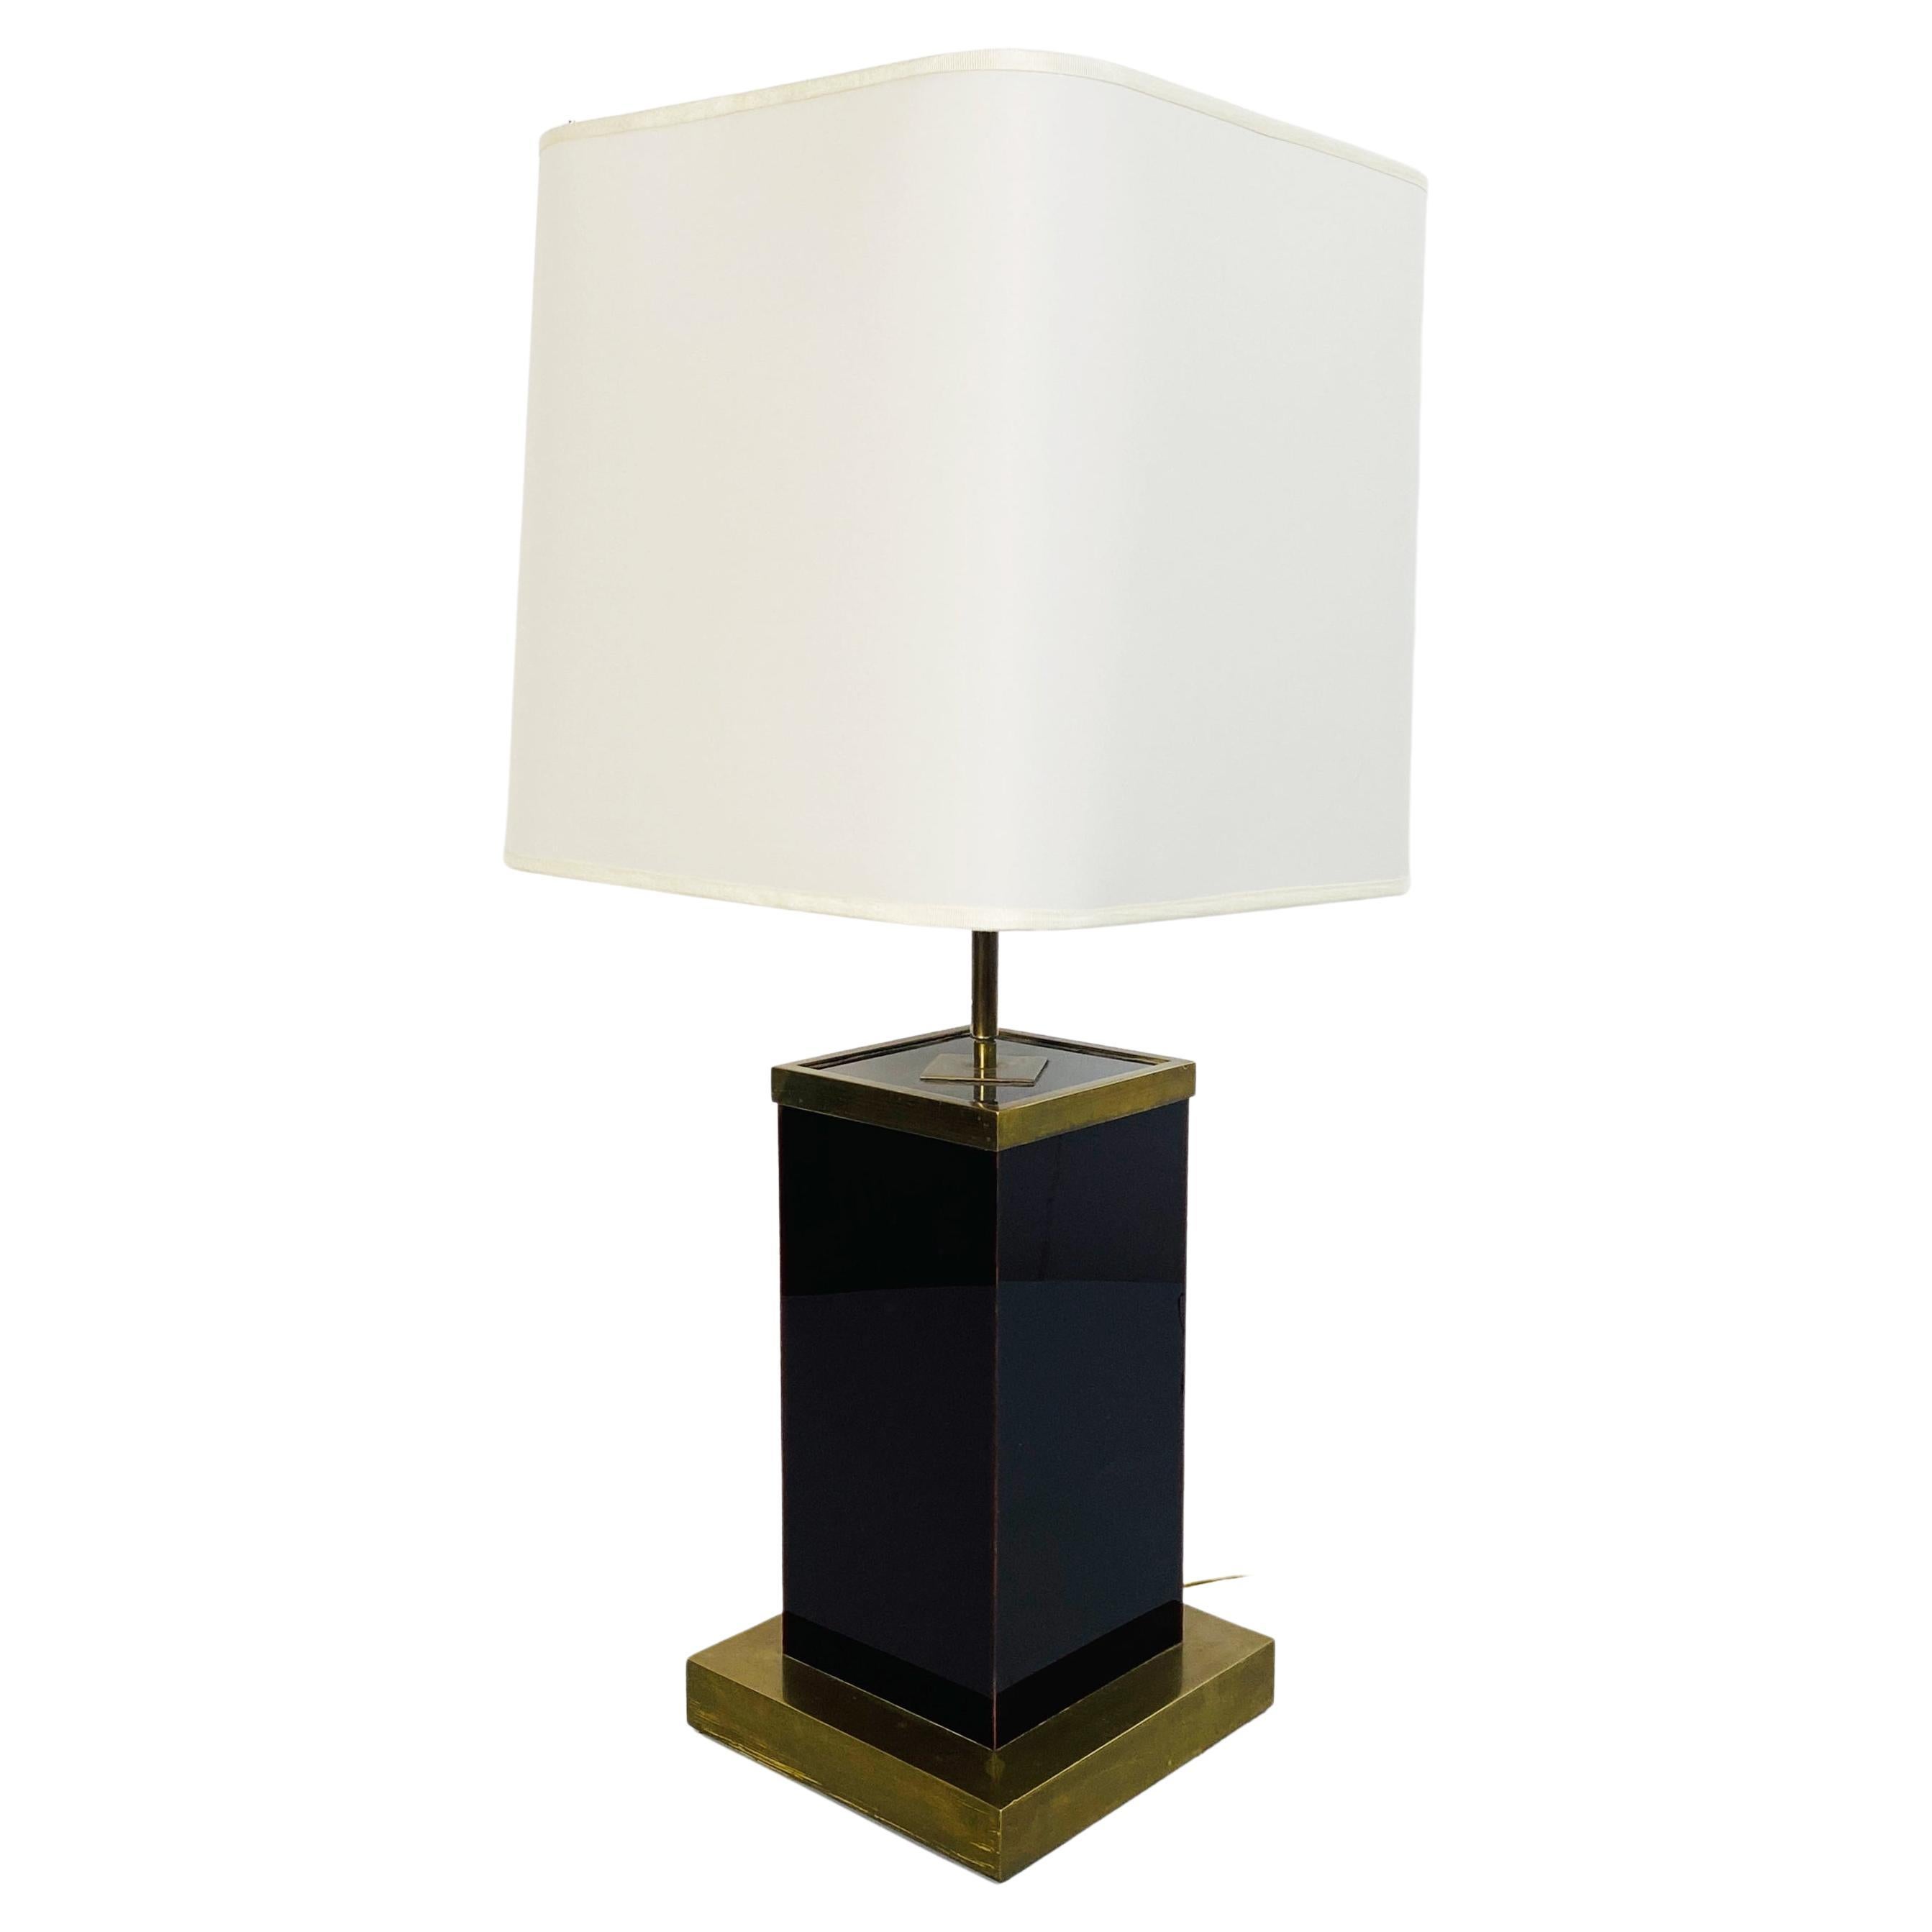 Italian Mid-Century Brown Plexiglass, White Fabric and Brass Table Lamp, 1970s For Sale